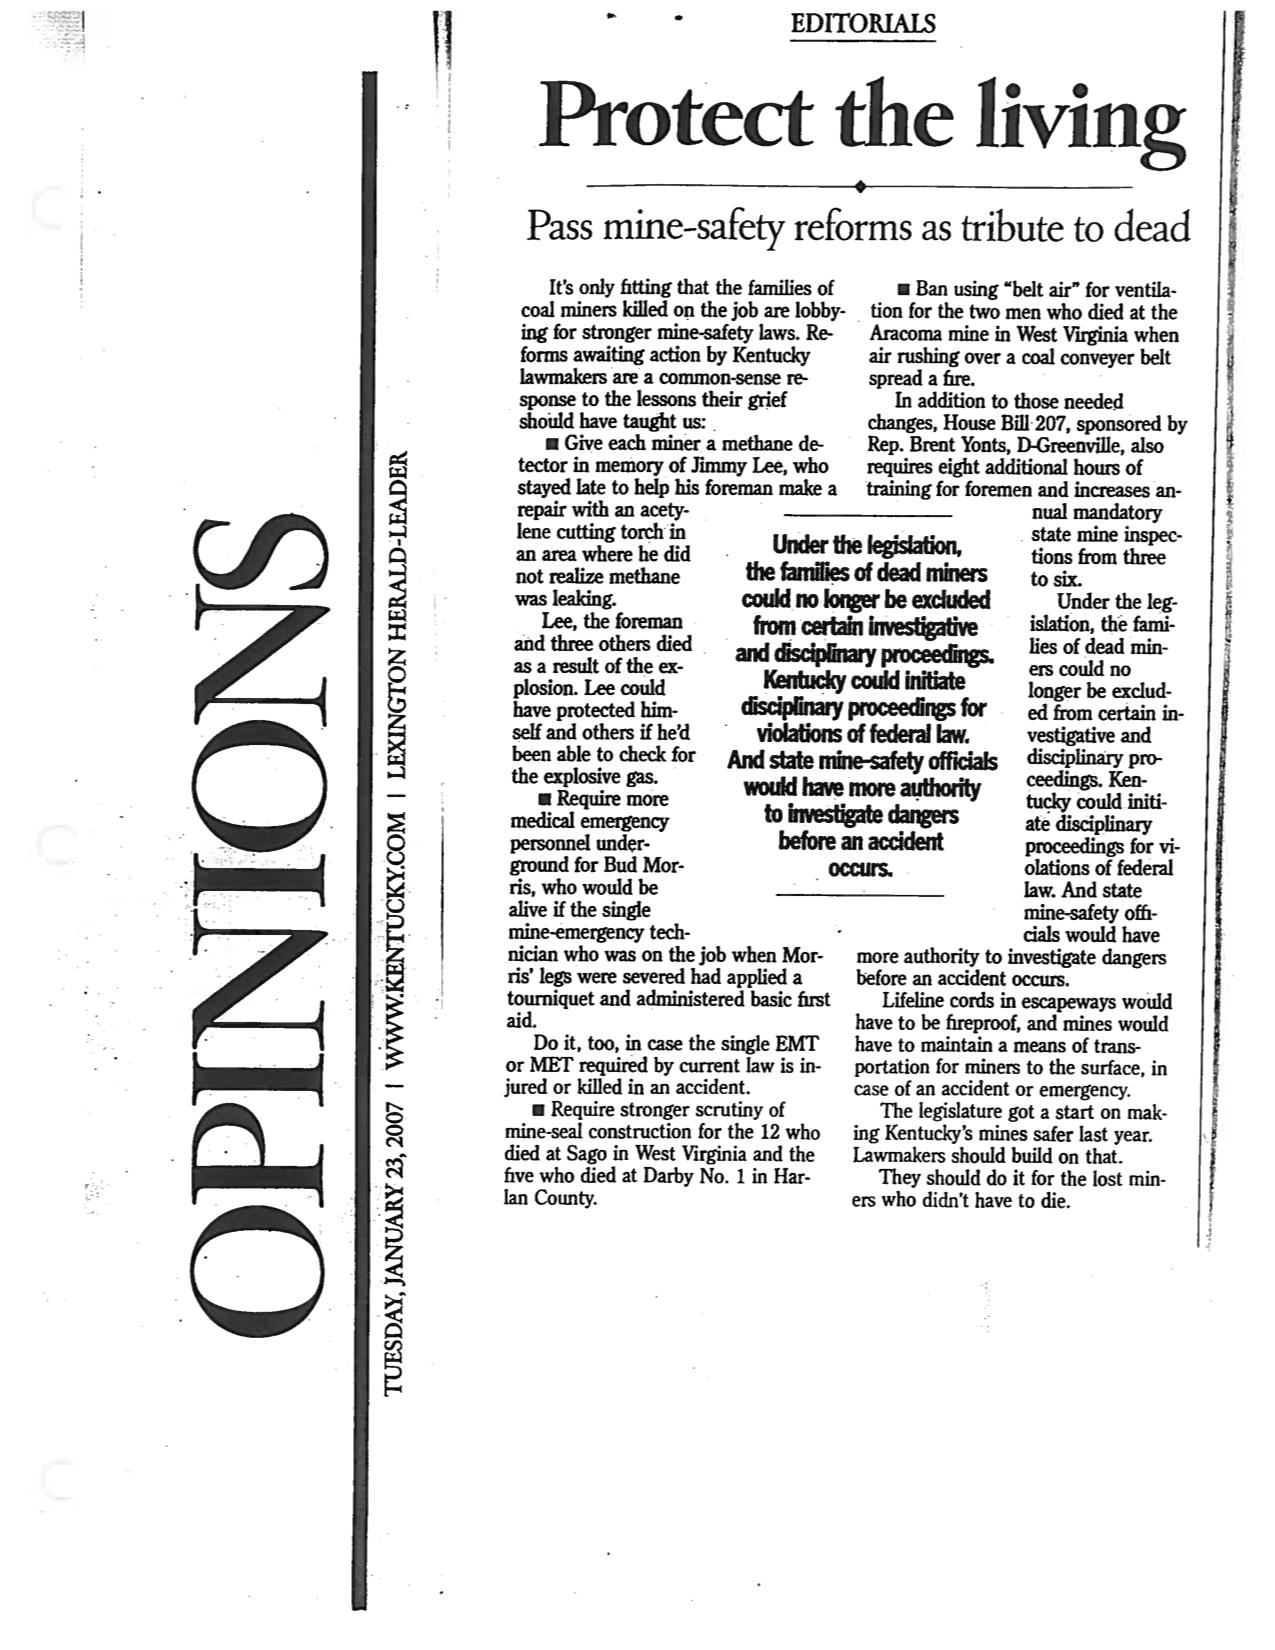 An editorial from the Lexington Herald-Leader, challenging lawmakers to pass mine safety legislation as a tribute to miners who have died on the job. [Click to expand]